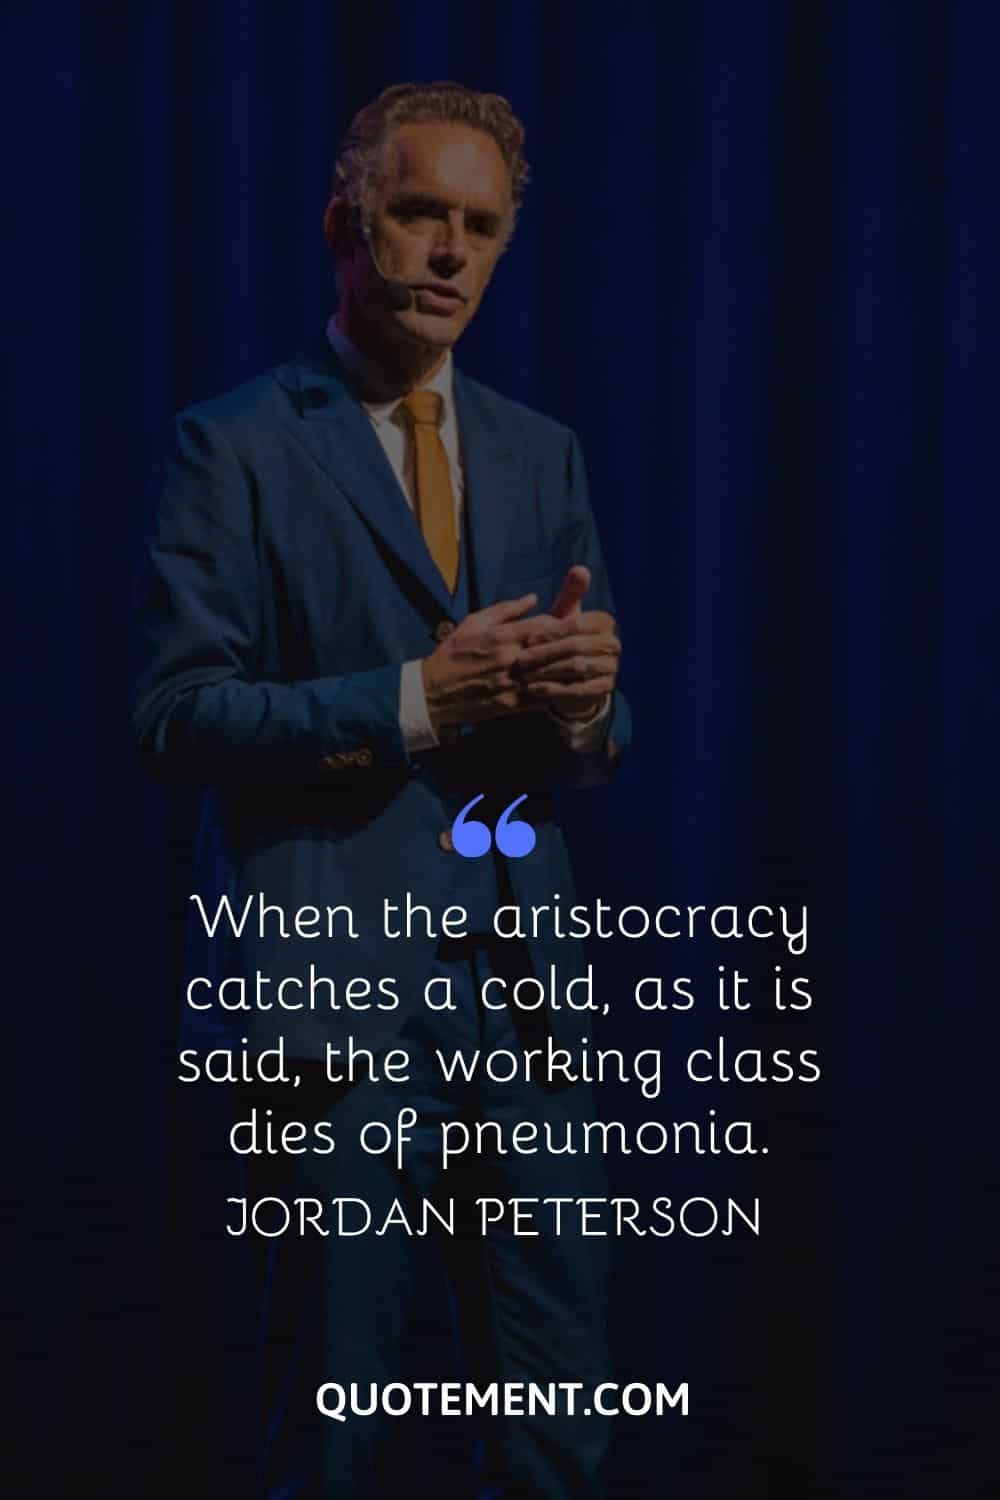 “When the aristocracy catches a cold, as it is said, the working class dies of pneumonia.” — Jordan Peterson